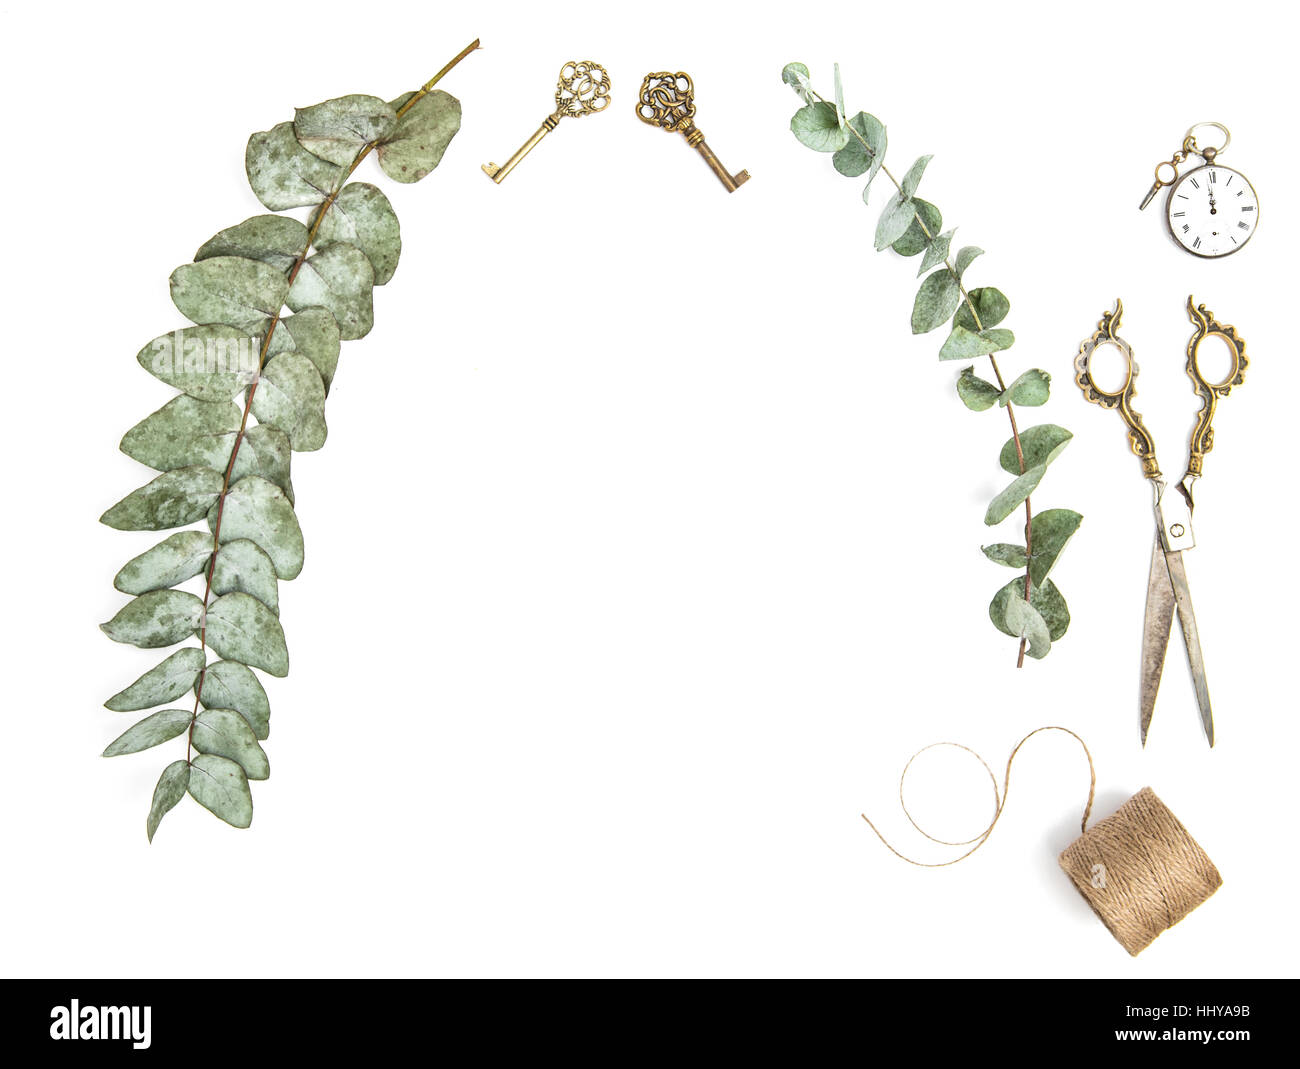 Minimalistic creative floral flat lay. Vintage tools and eucalyptus branches on white background Stock Photo